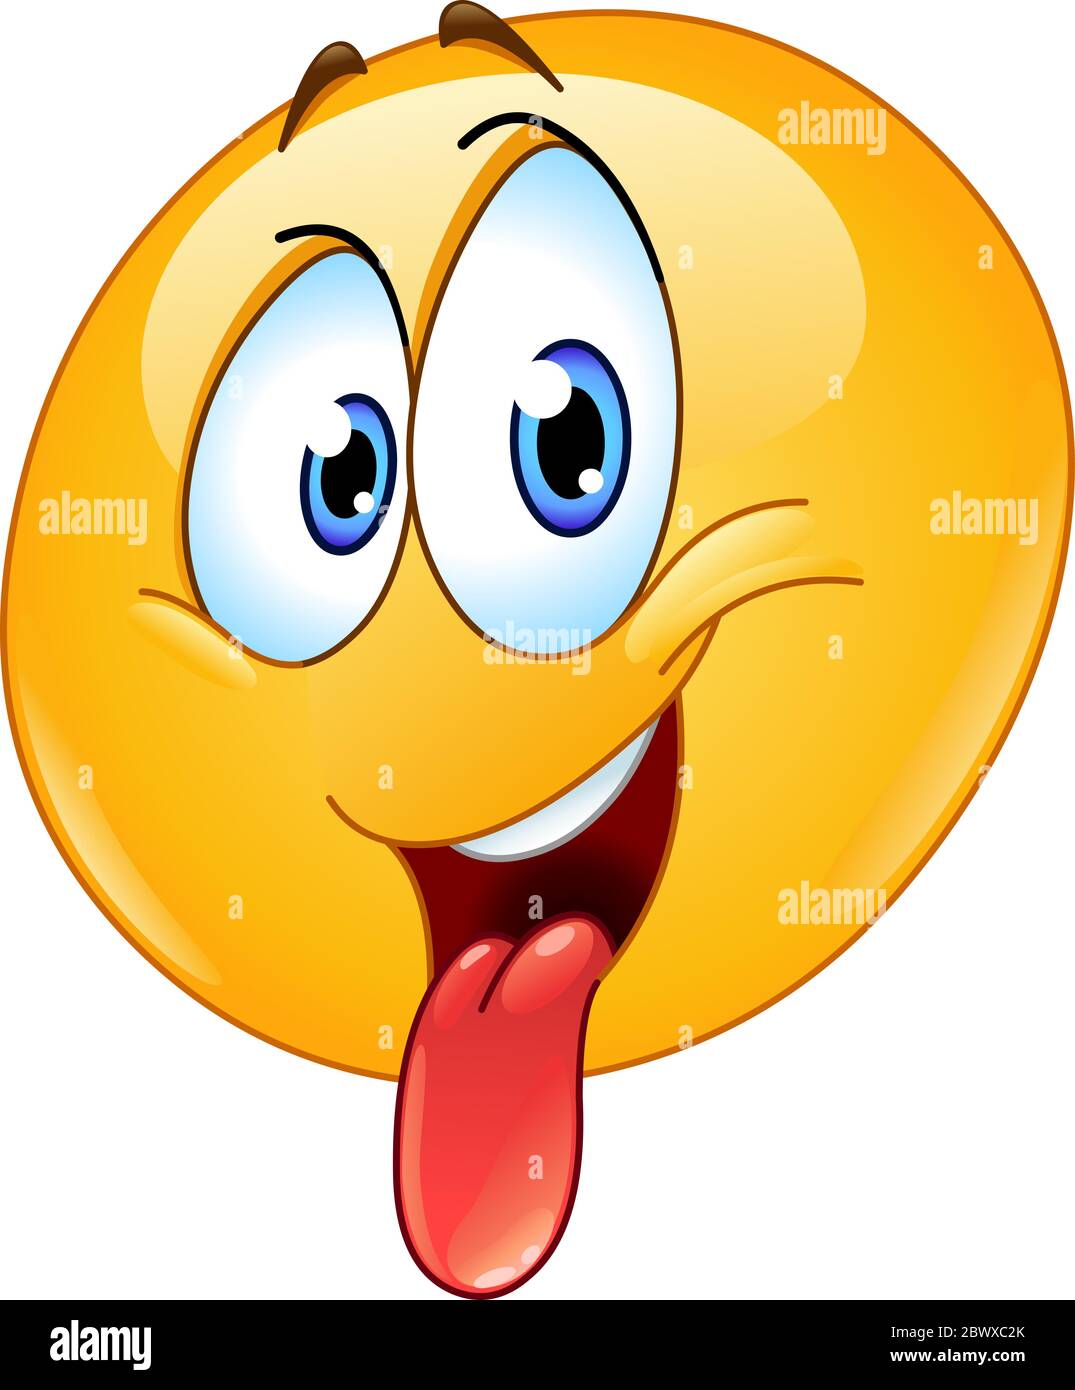 Emoticon sticking out a tongue Stock Vector